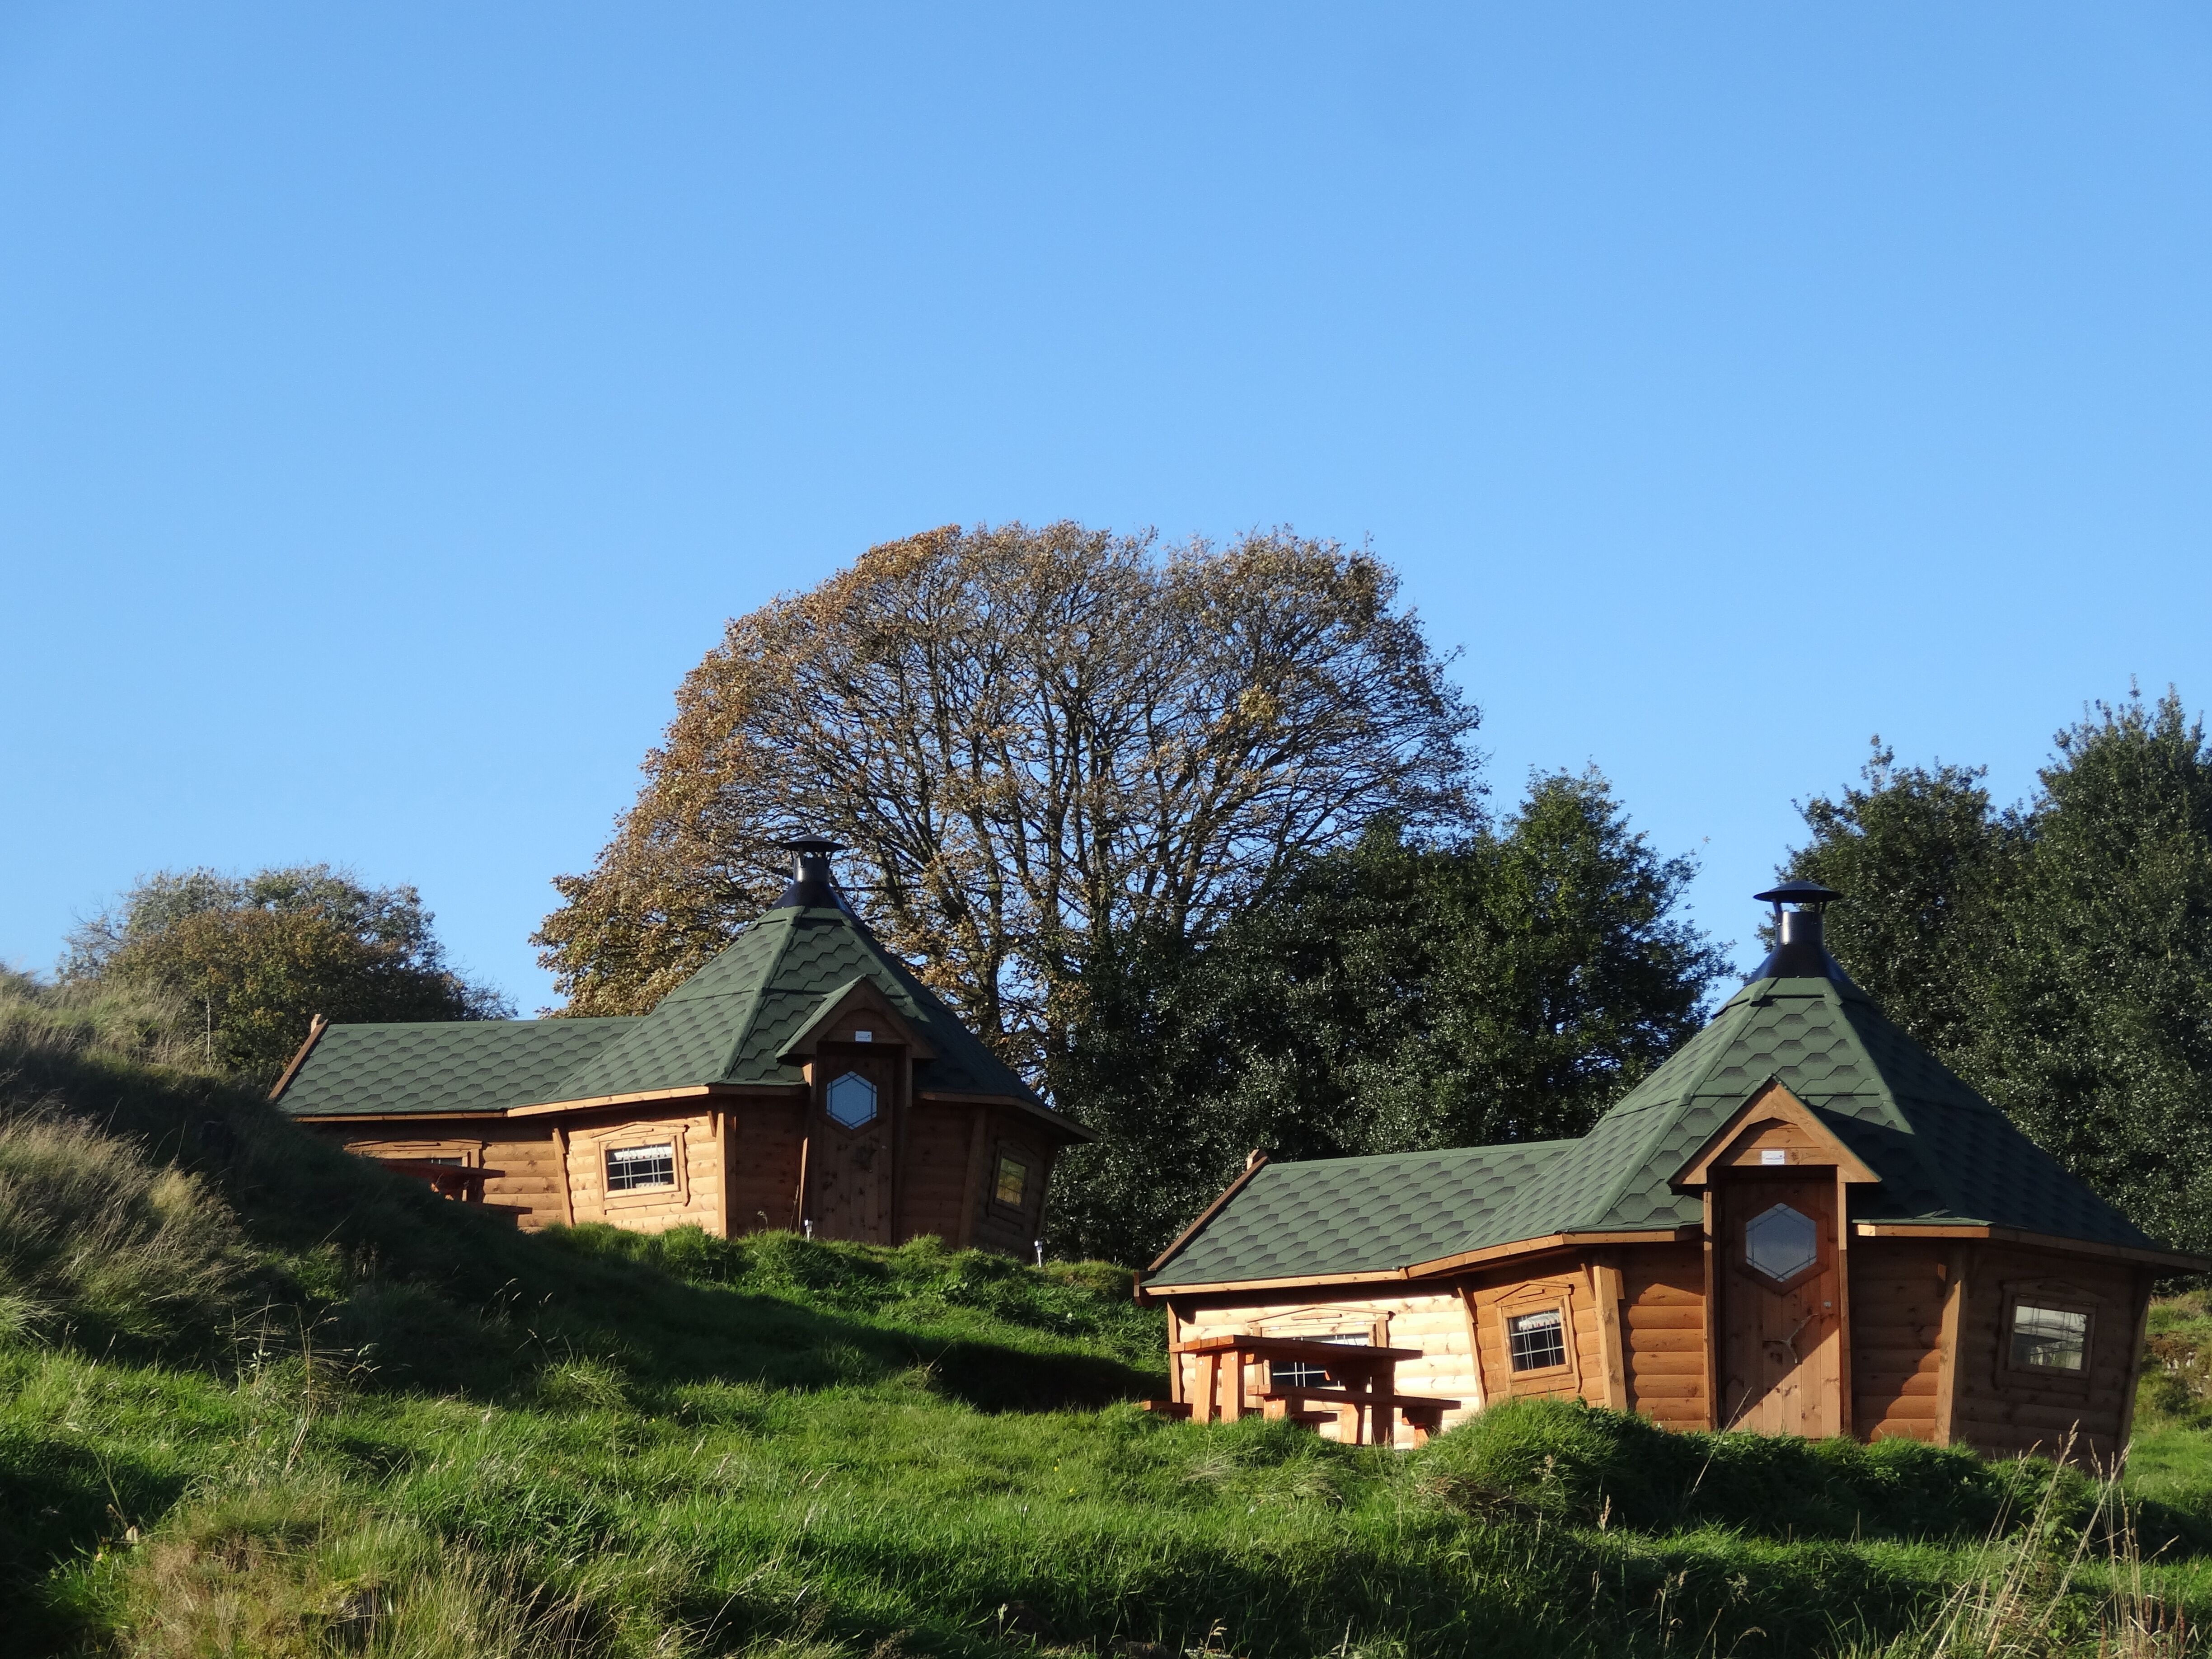 black beck farm camping cabins timber buildings on hillside with green roof and blue skies and tree in background